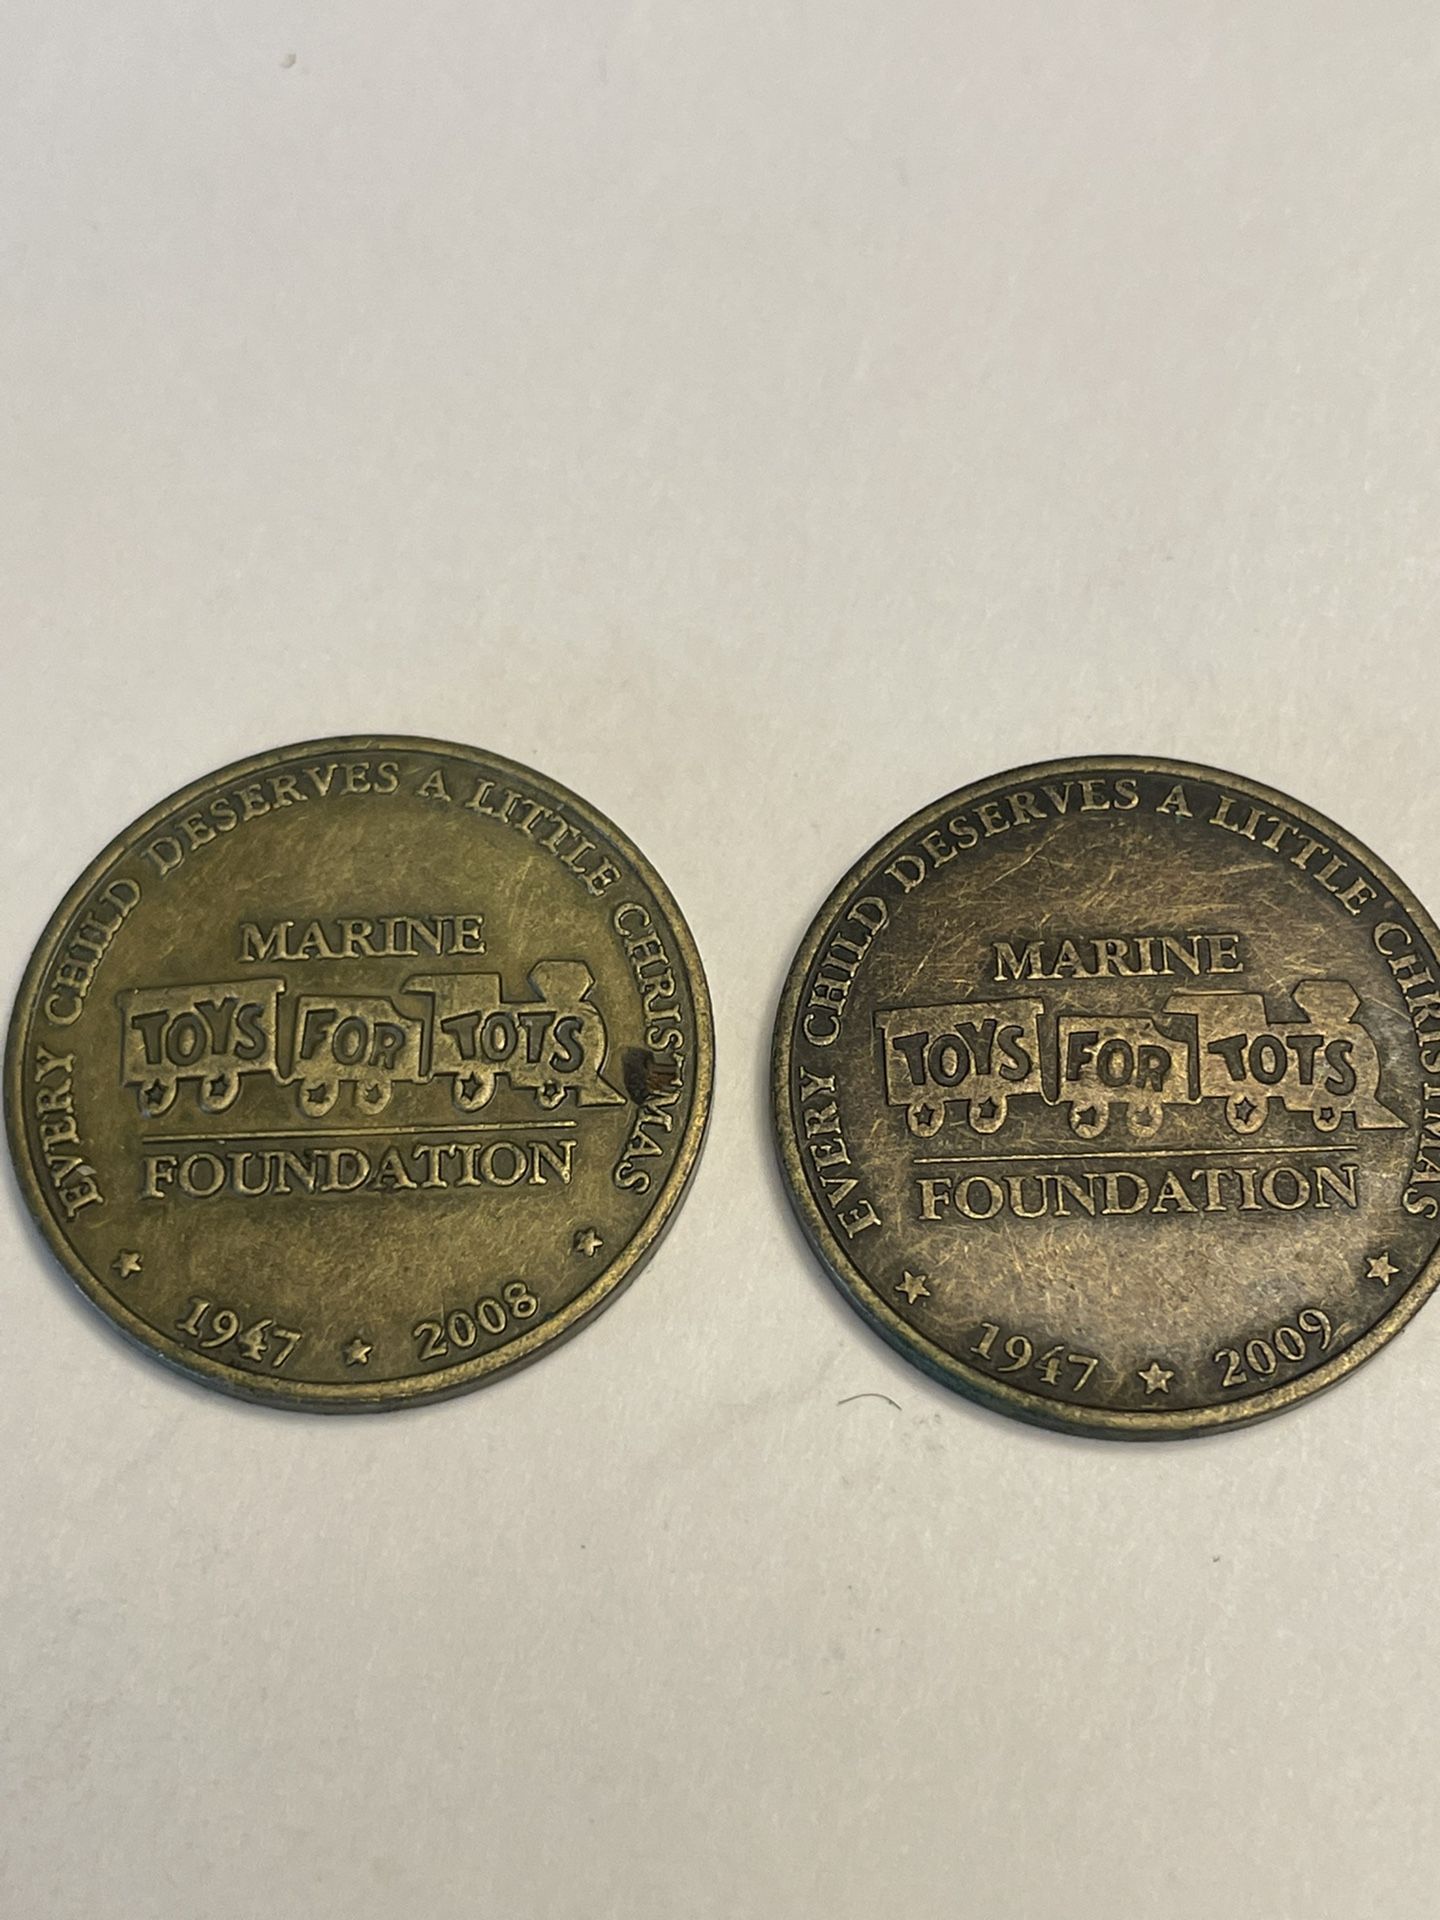 2008 & 2009 Toys For Tots Marine Coins